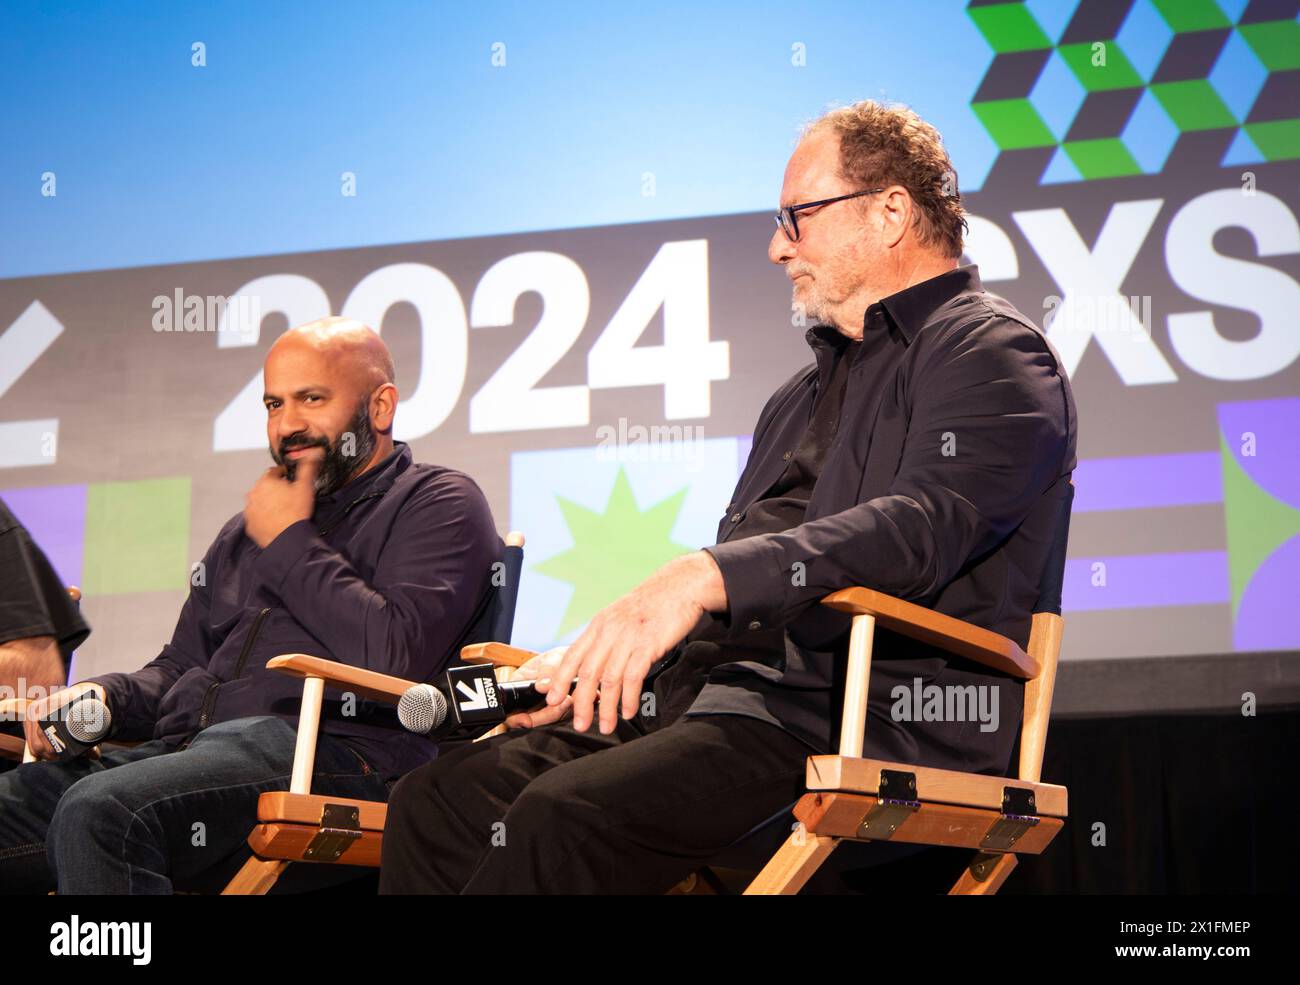 Austin, TX. Mar. 9, 2023. Office Space panel at SXSW 2024 with stars Ron Livingston, Stephen Root and creator Mike Judge. @ Veronica Bruno / Alamy. Stock Photo